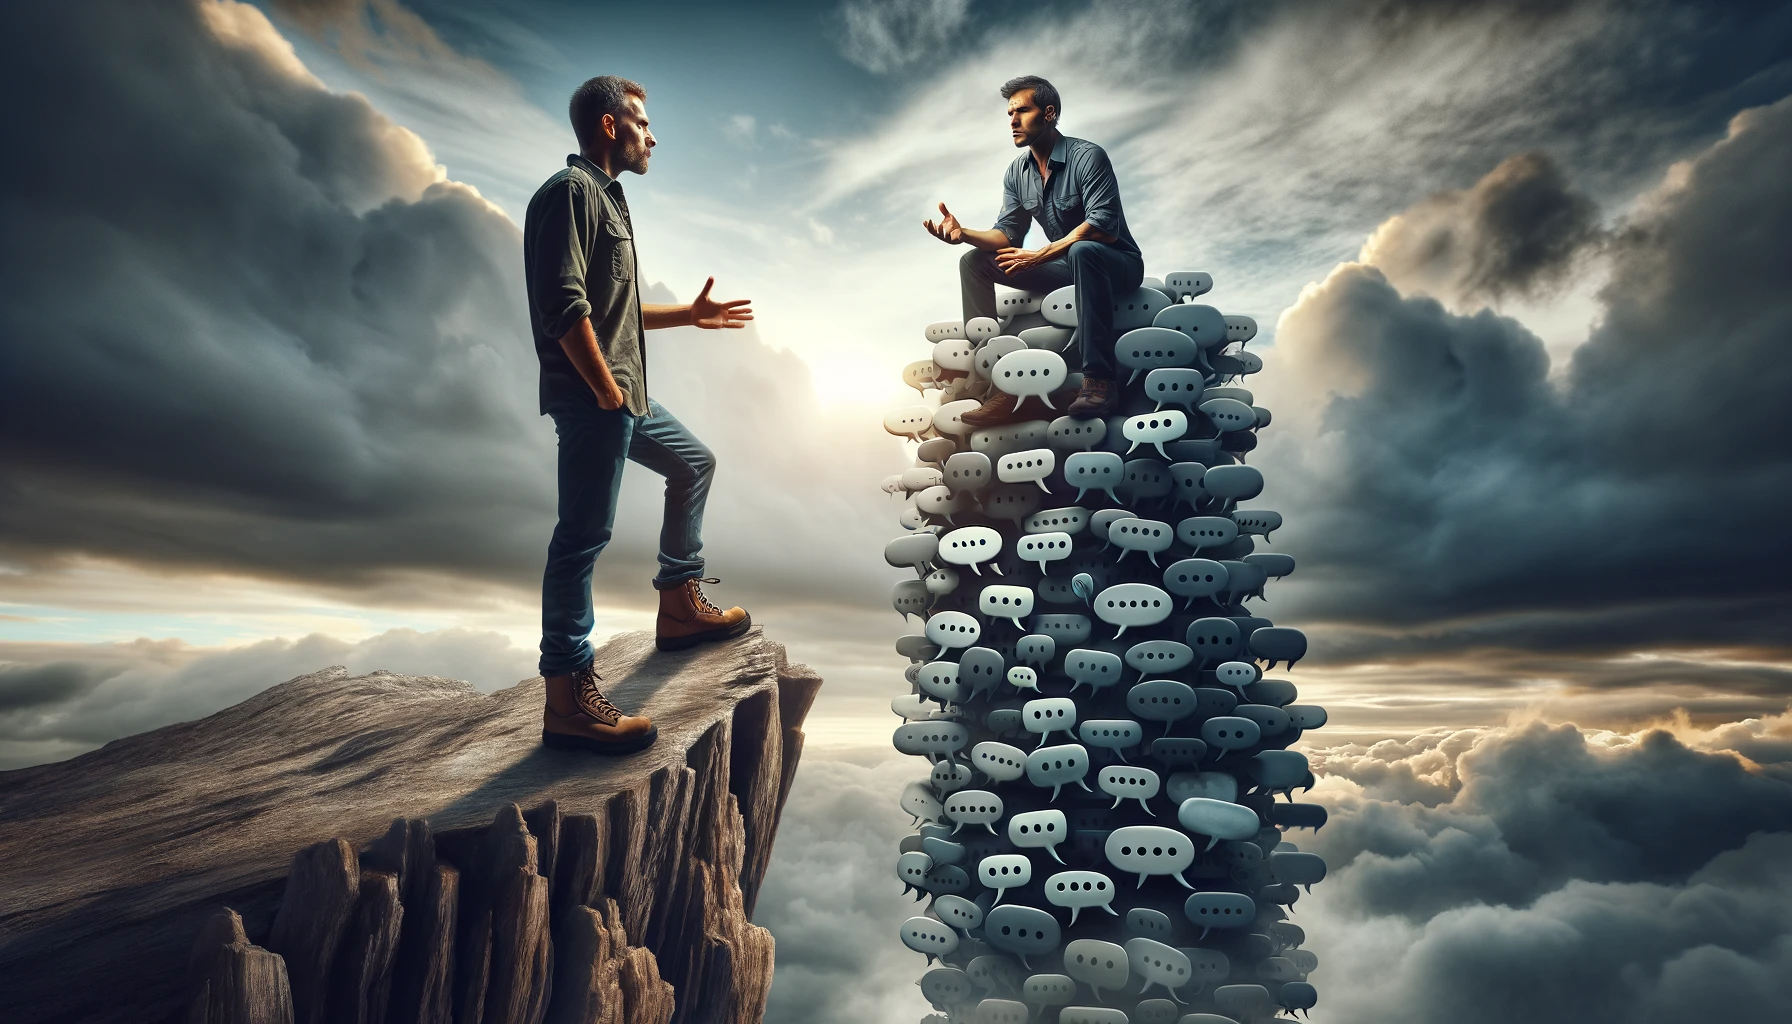 Prompt: A dramatic scene depicting two men in a conversation. One man stands on the edge of a rugged cliff, dressed in casual hiking gear. His posture is assertive, and he is making strong gestures with his hands. Facing him is another man standing on a towering pile of speech bubbles, symbolizing an intent verbal exchange. The speech bubble pile is as high as the cliff, putting both men at eye level. The background features a dramatic sky with dark clouds, enhancing the intense atmosphere of the scene. Both men are of average build, one with short hair and the other slightly longer.